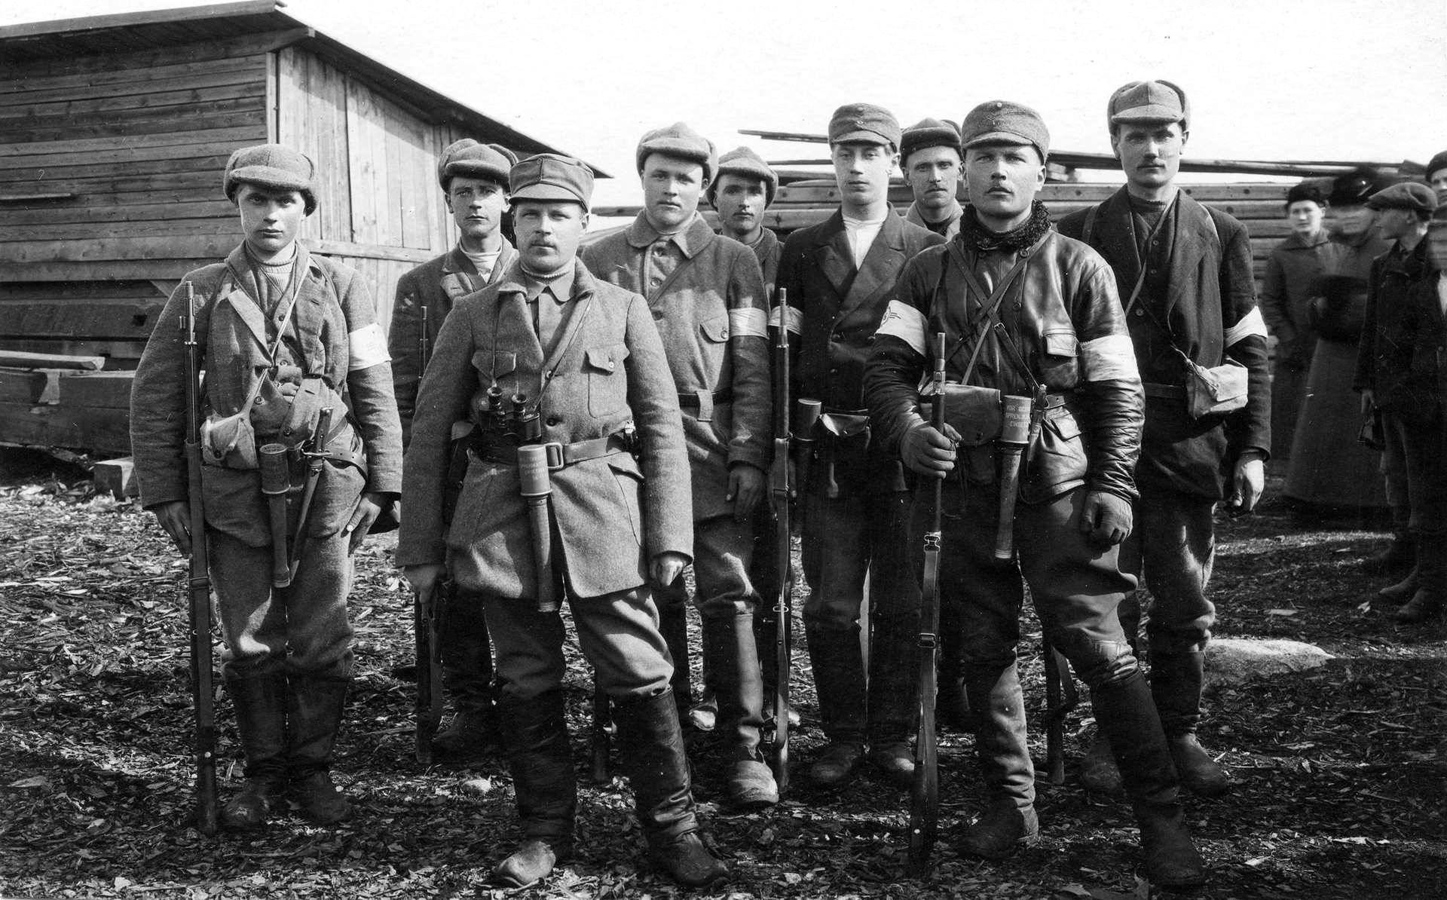 April 13, 1918. The first arrived in Pori white reconnaissance patrol